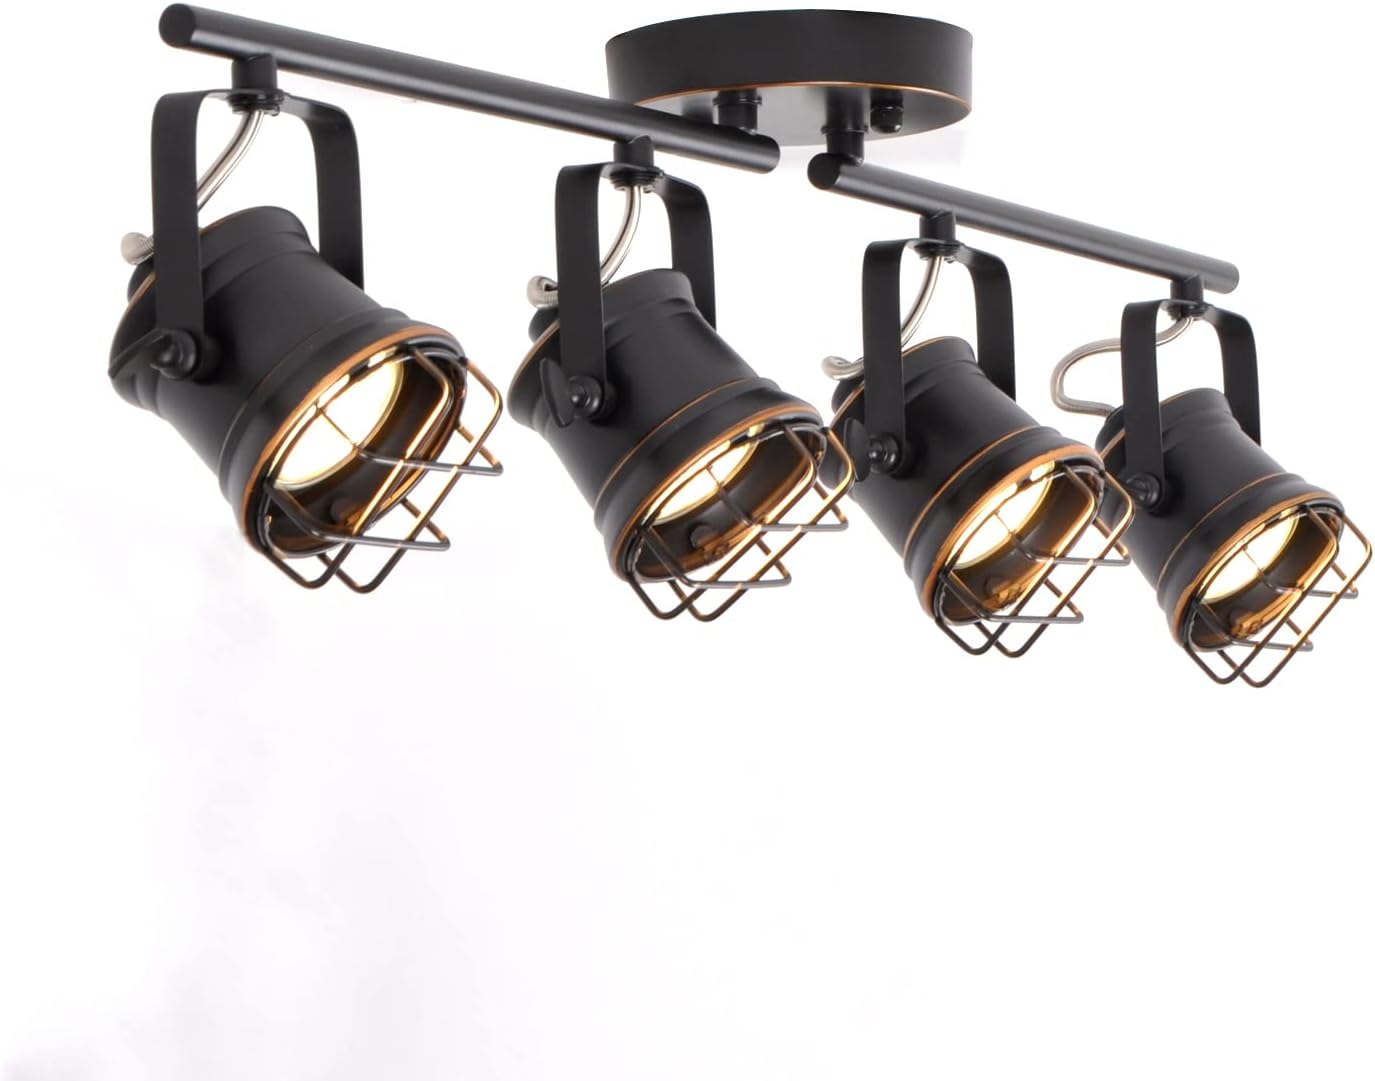 Lcaoful Track Lighting Fixtures Ceiling Spot LightFoldable and Abjustable Brozne Track Lighting Kits with Flexibly Rotatable Light Head for Accent Decorative Lighting for Kitchen, Dining Room (Oil-Rubb